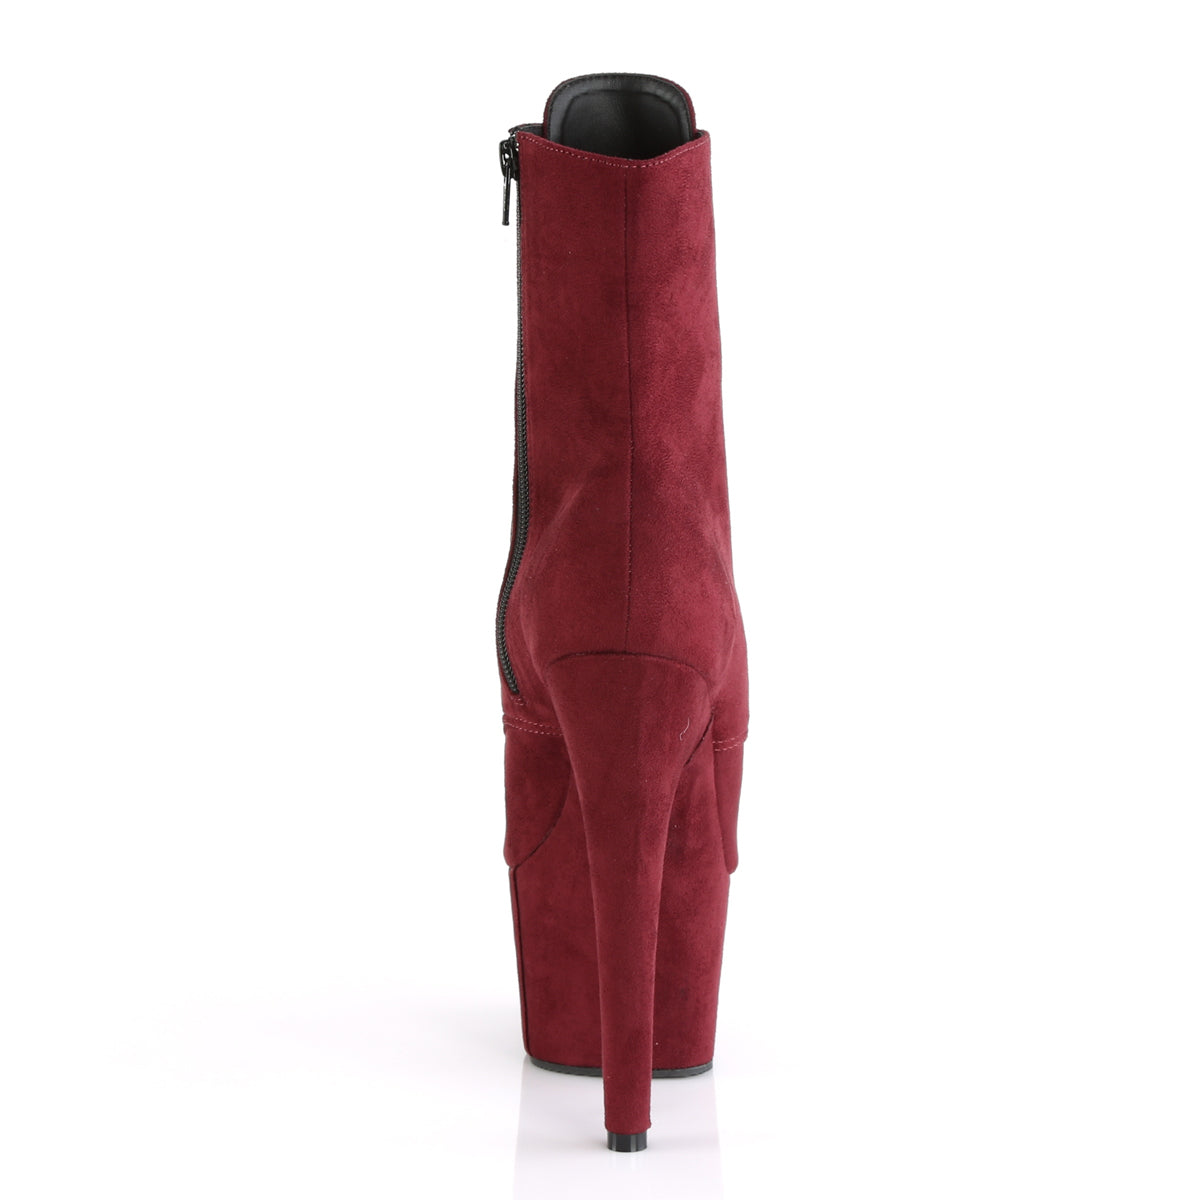 ADORE-1021FS Pleaser 7" Heel Burgundy Strippers Ankle Boots-Pleaser- Sexy Shoes Fetish Footwear